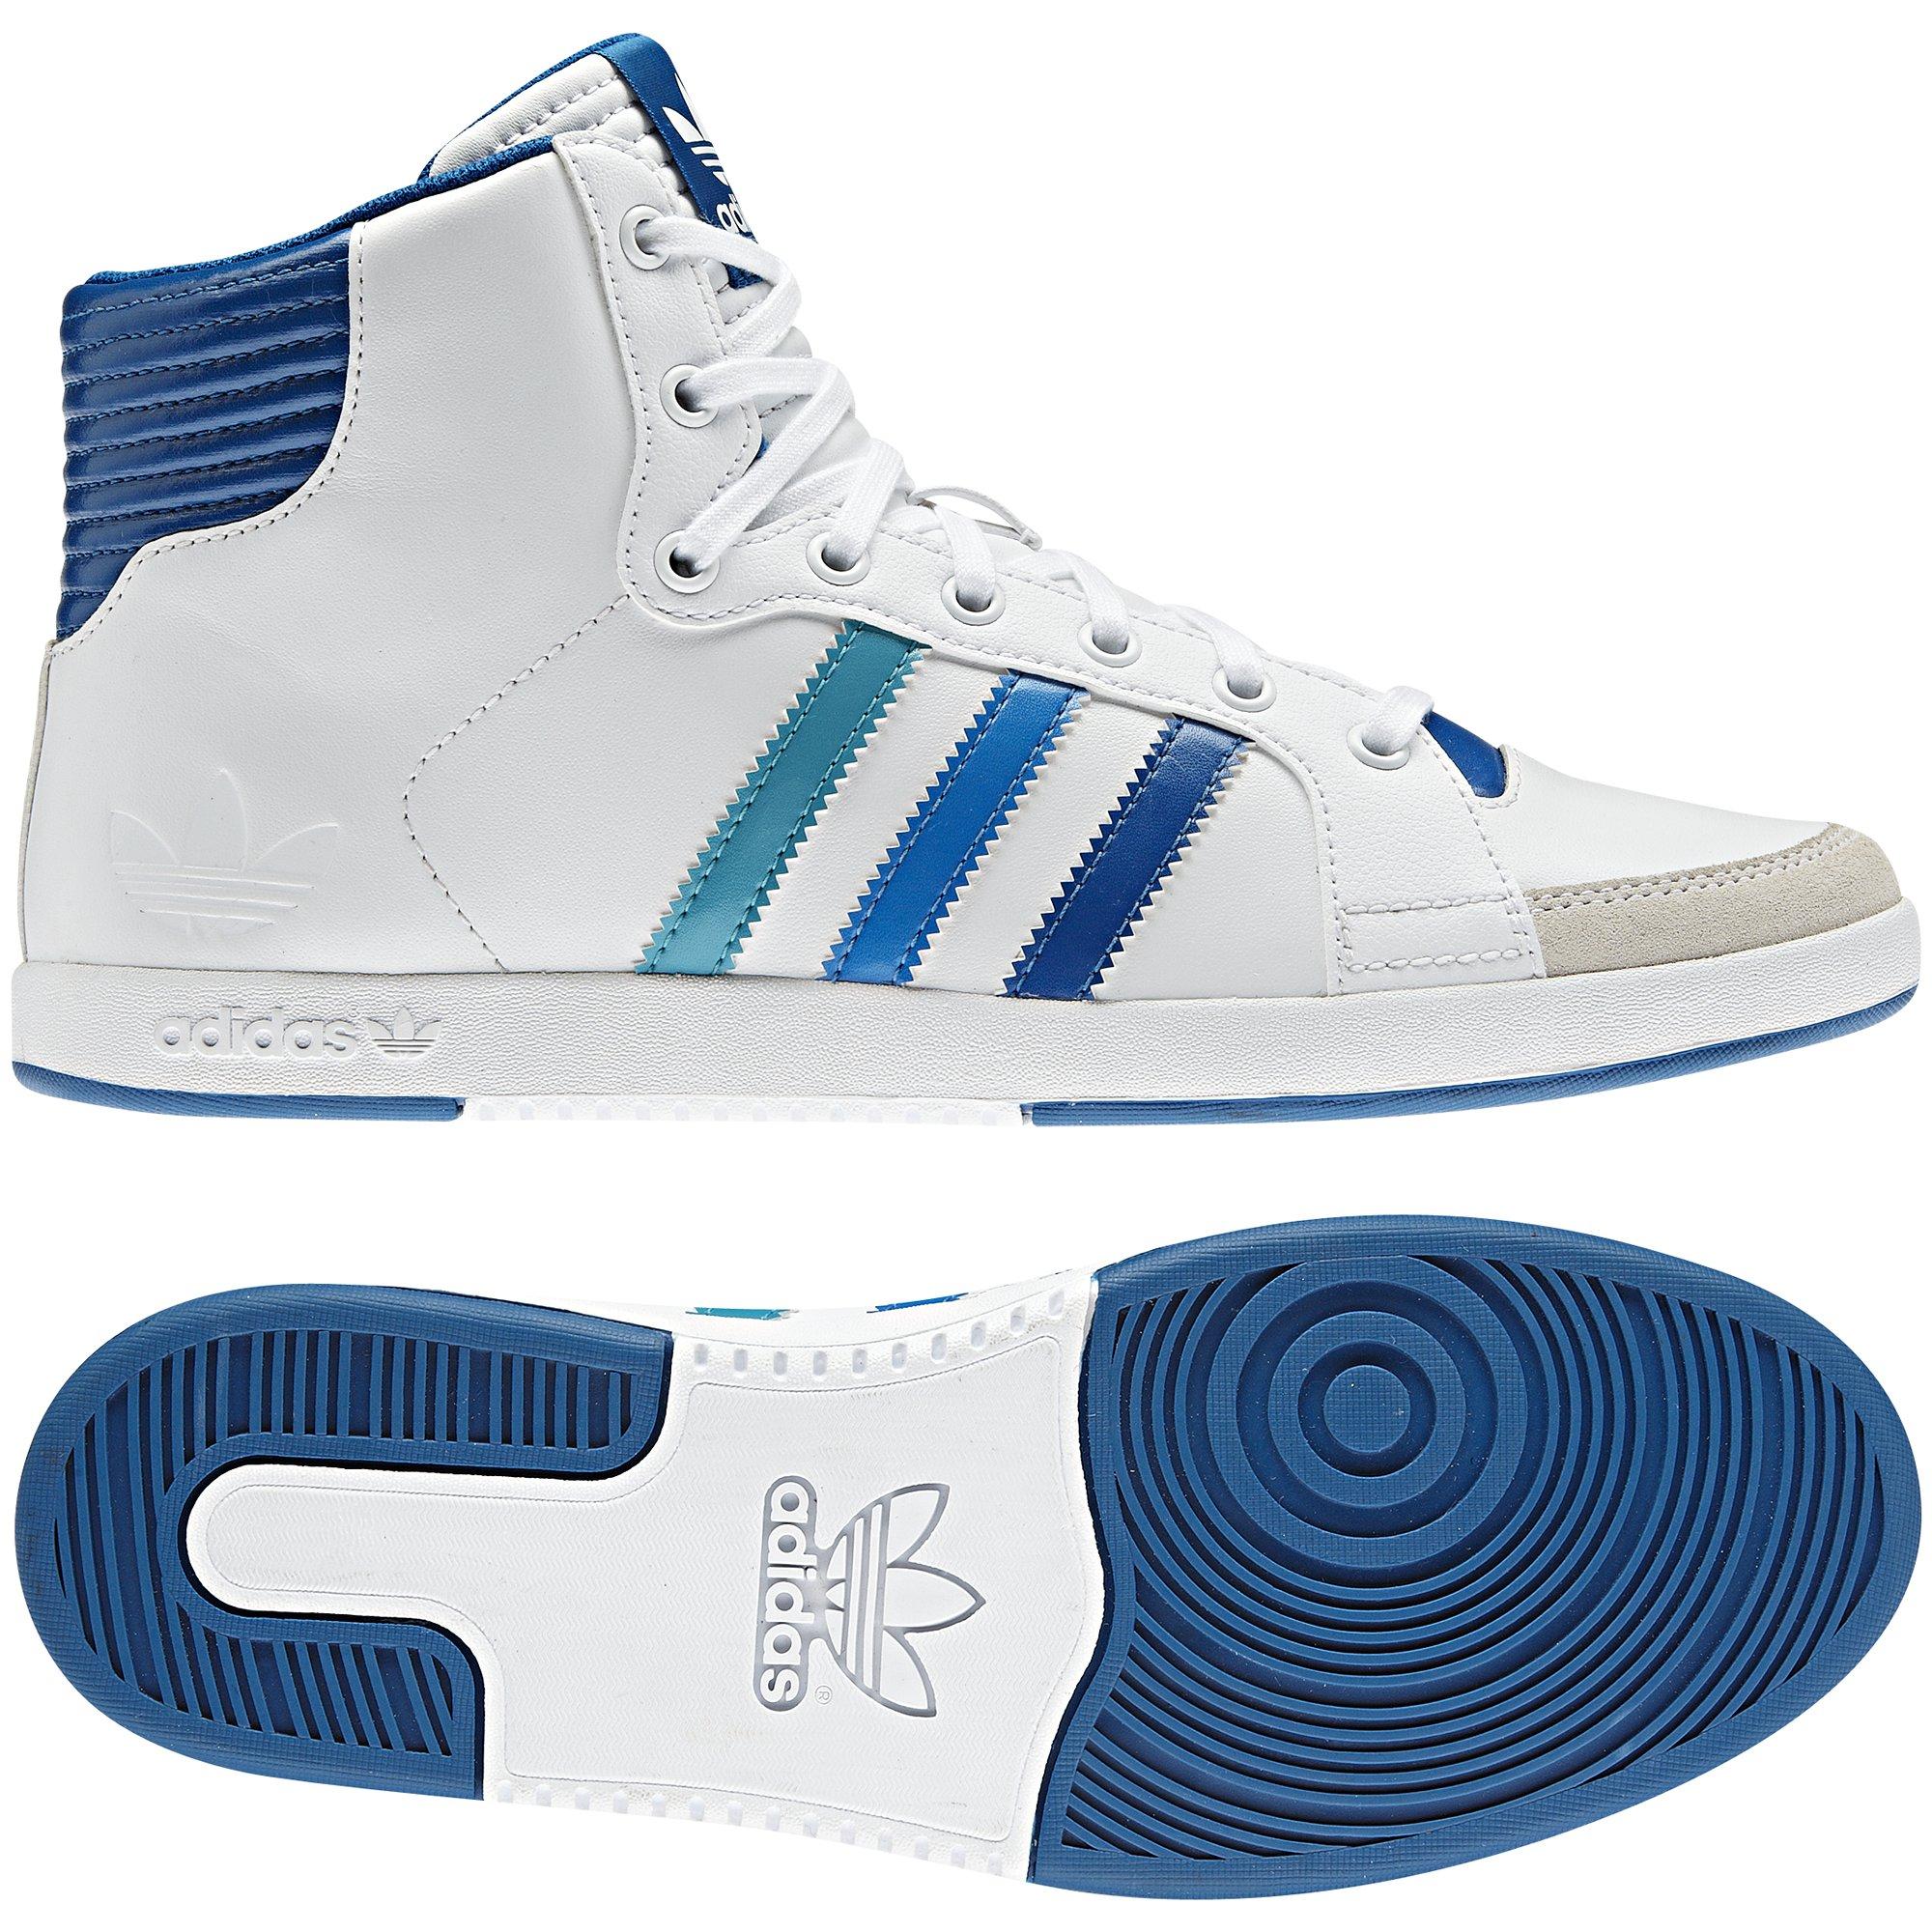 Foto adidas Court Side Hi Shoes Mujer